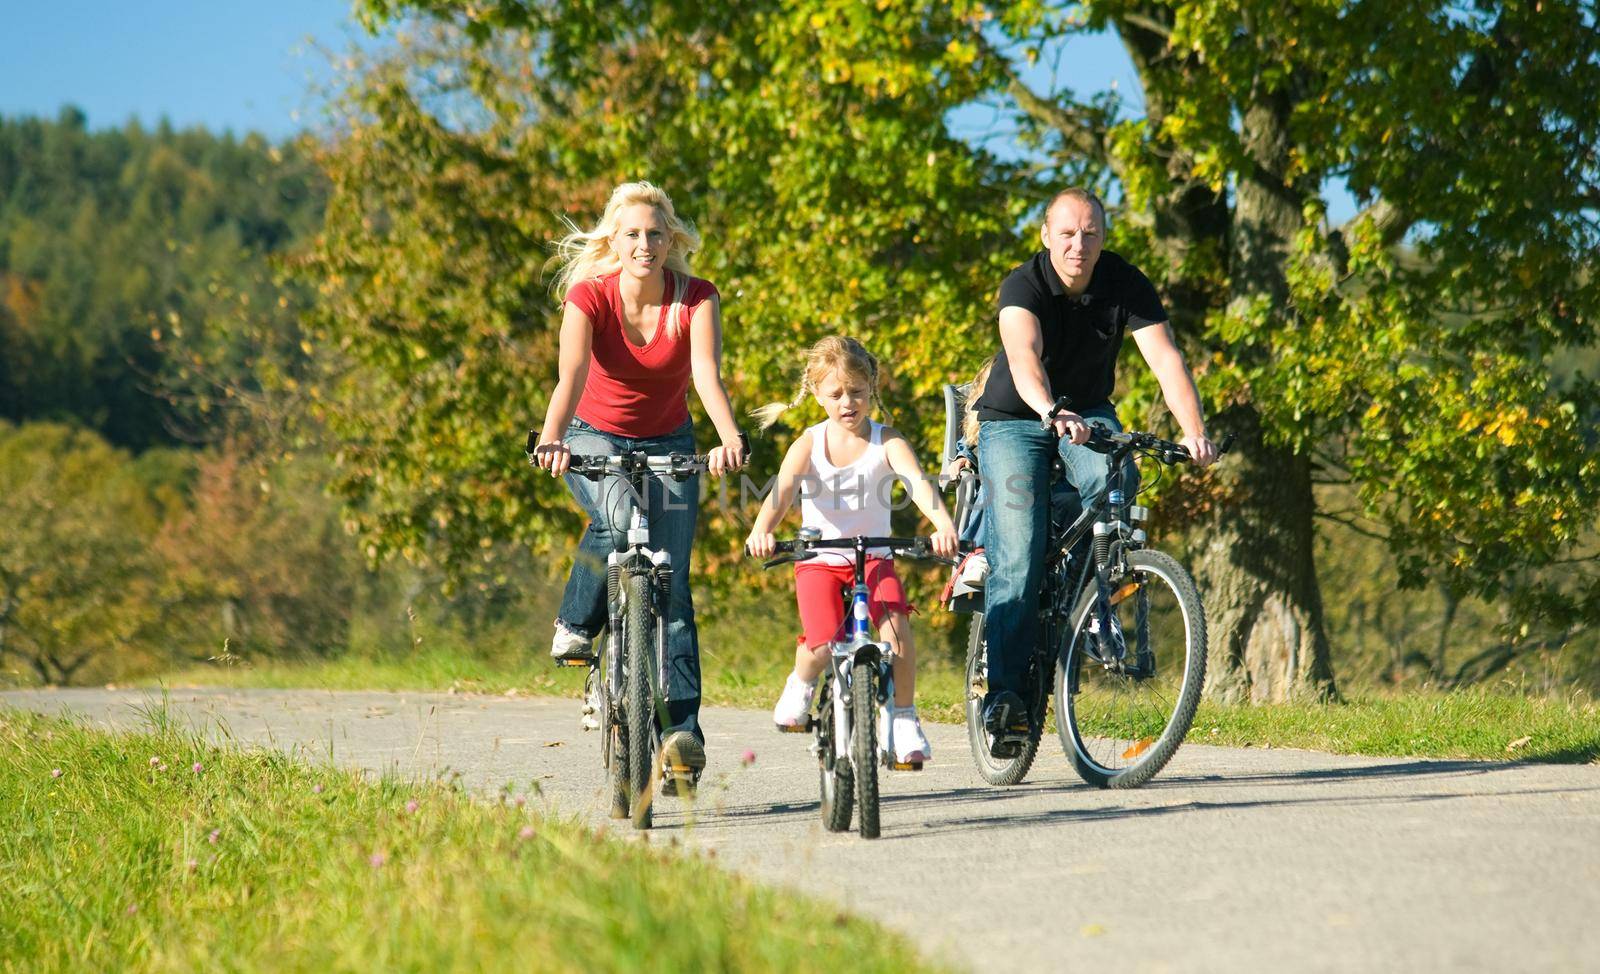 A family with children having a weekend excursion on their bikes